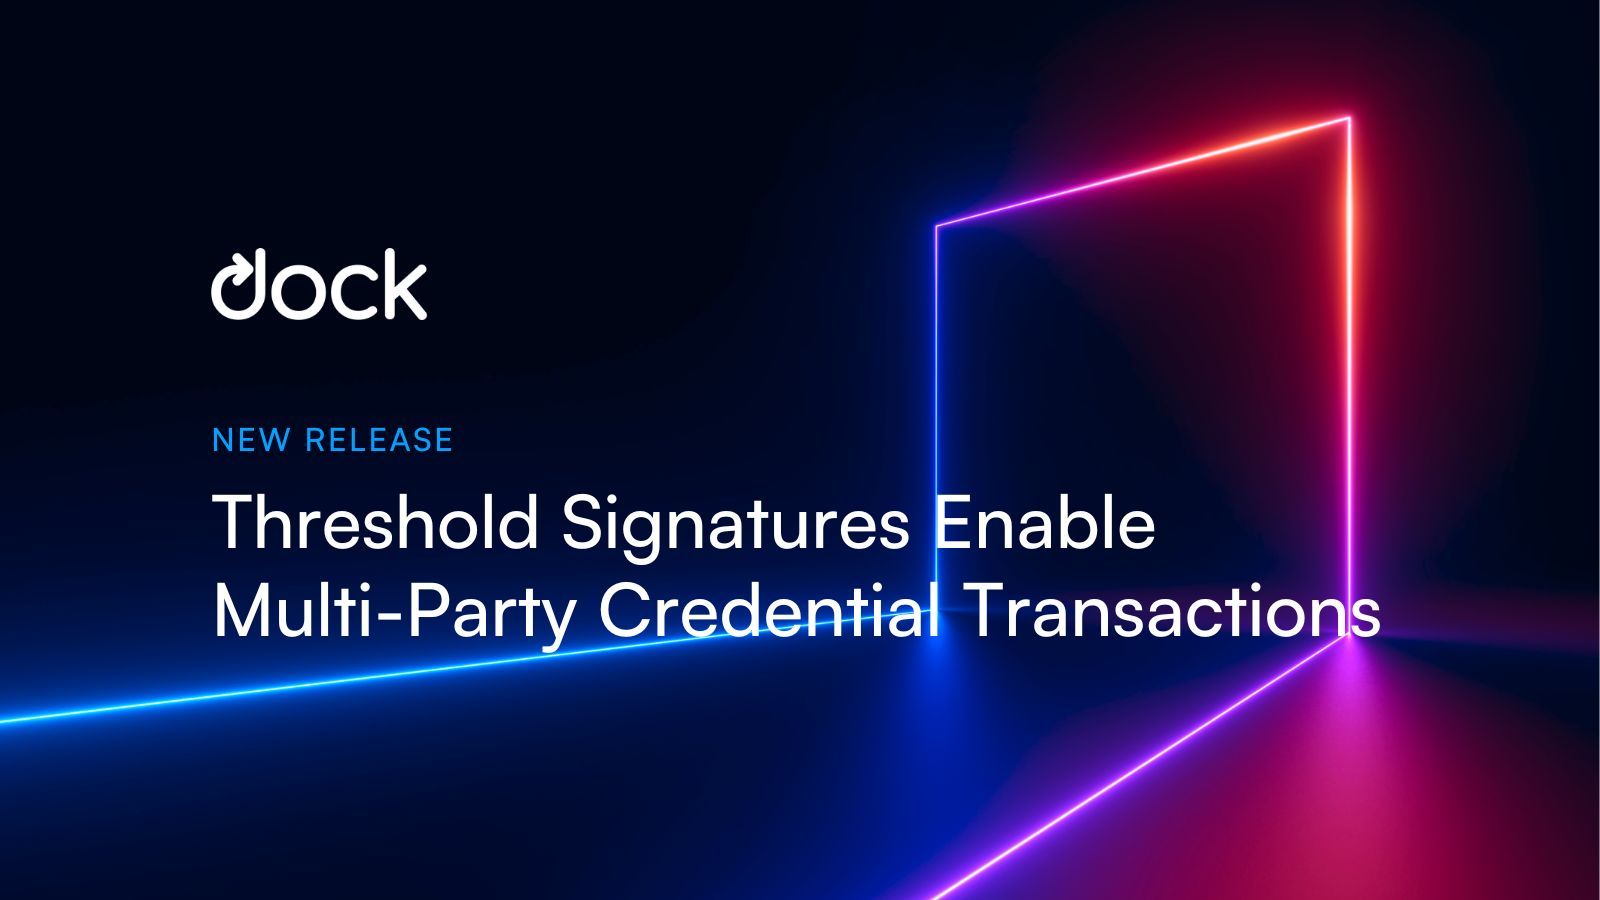 Dock Introduces Threshold Signatures for Secure Multi-Party Credential Transactions